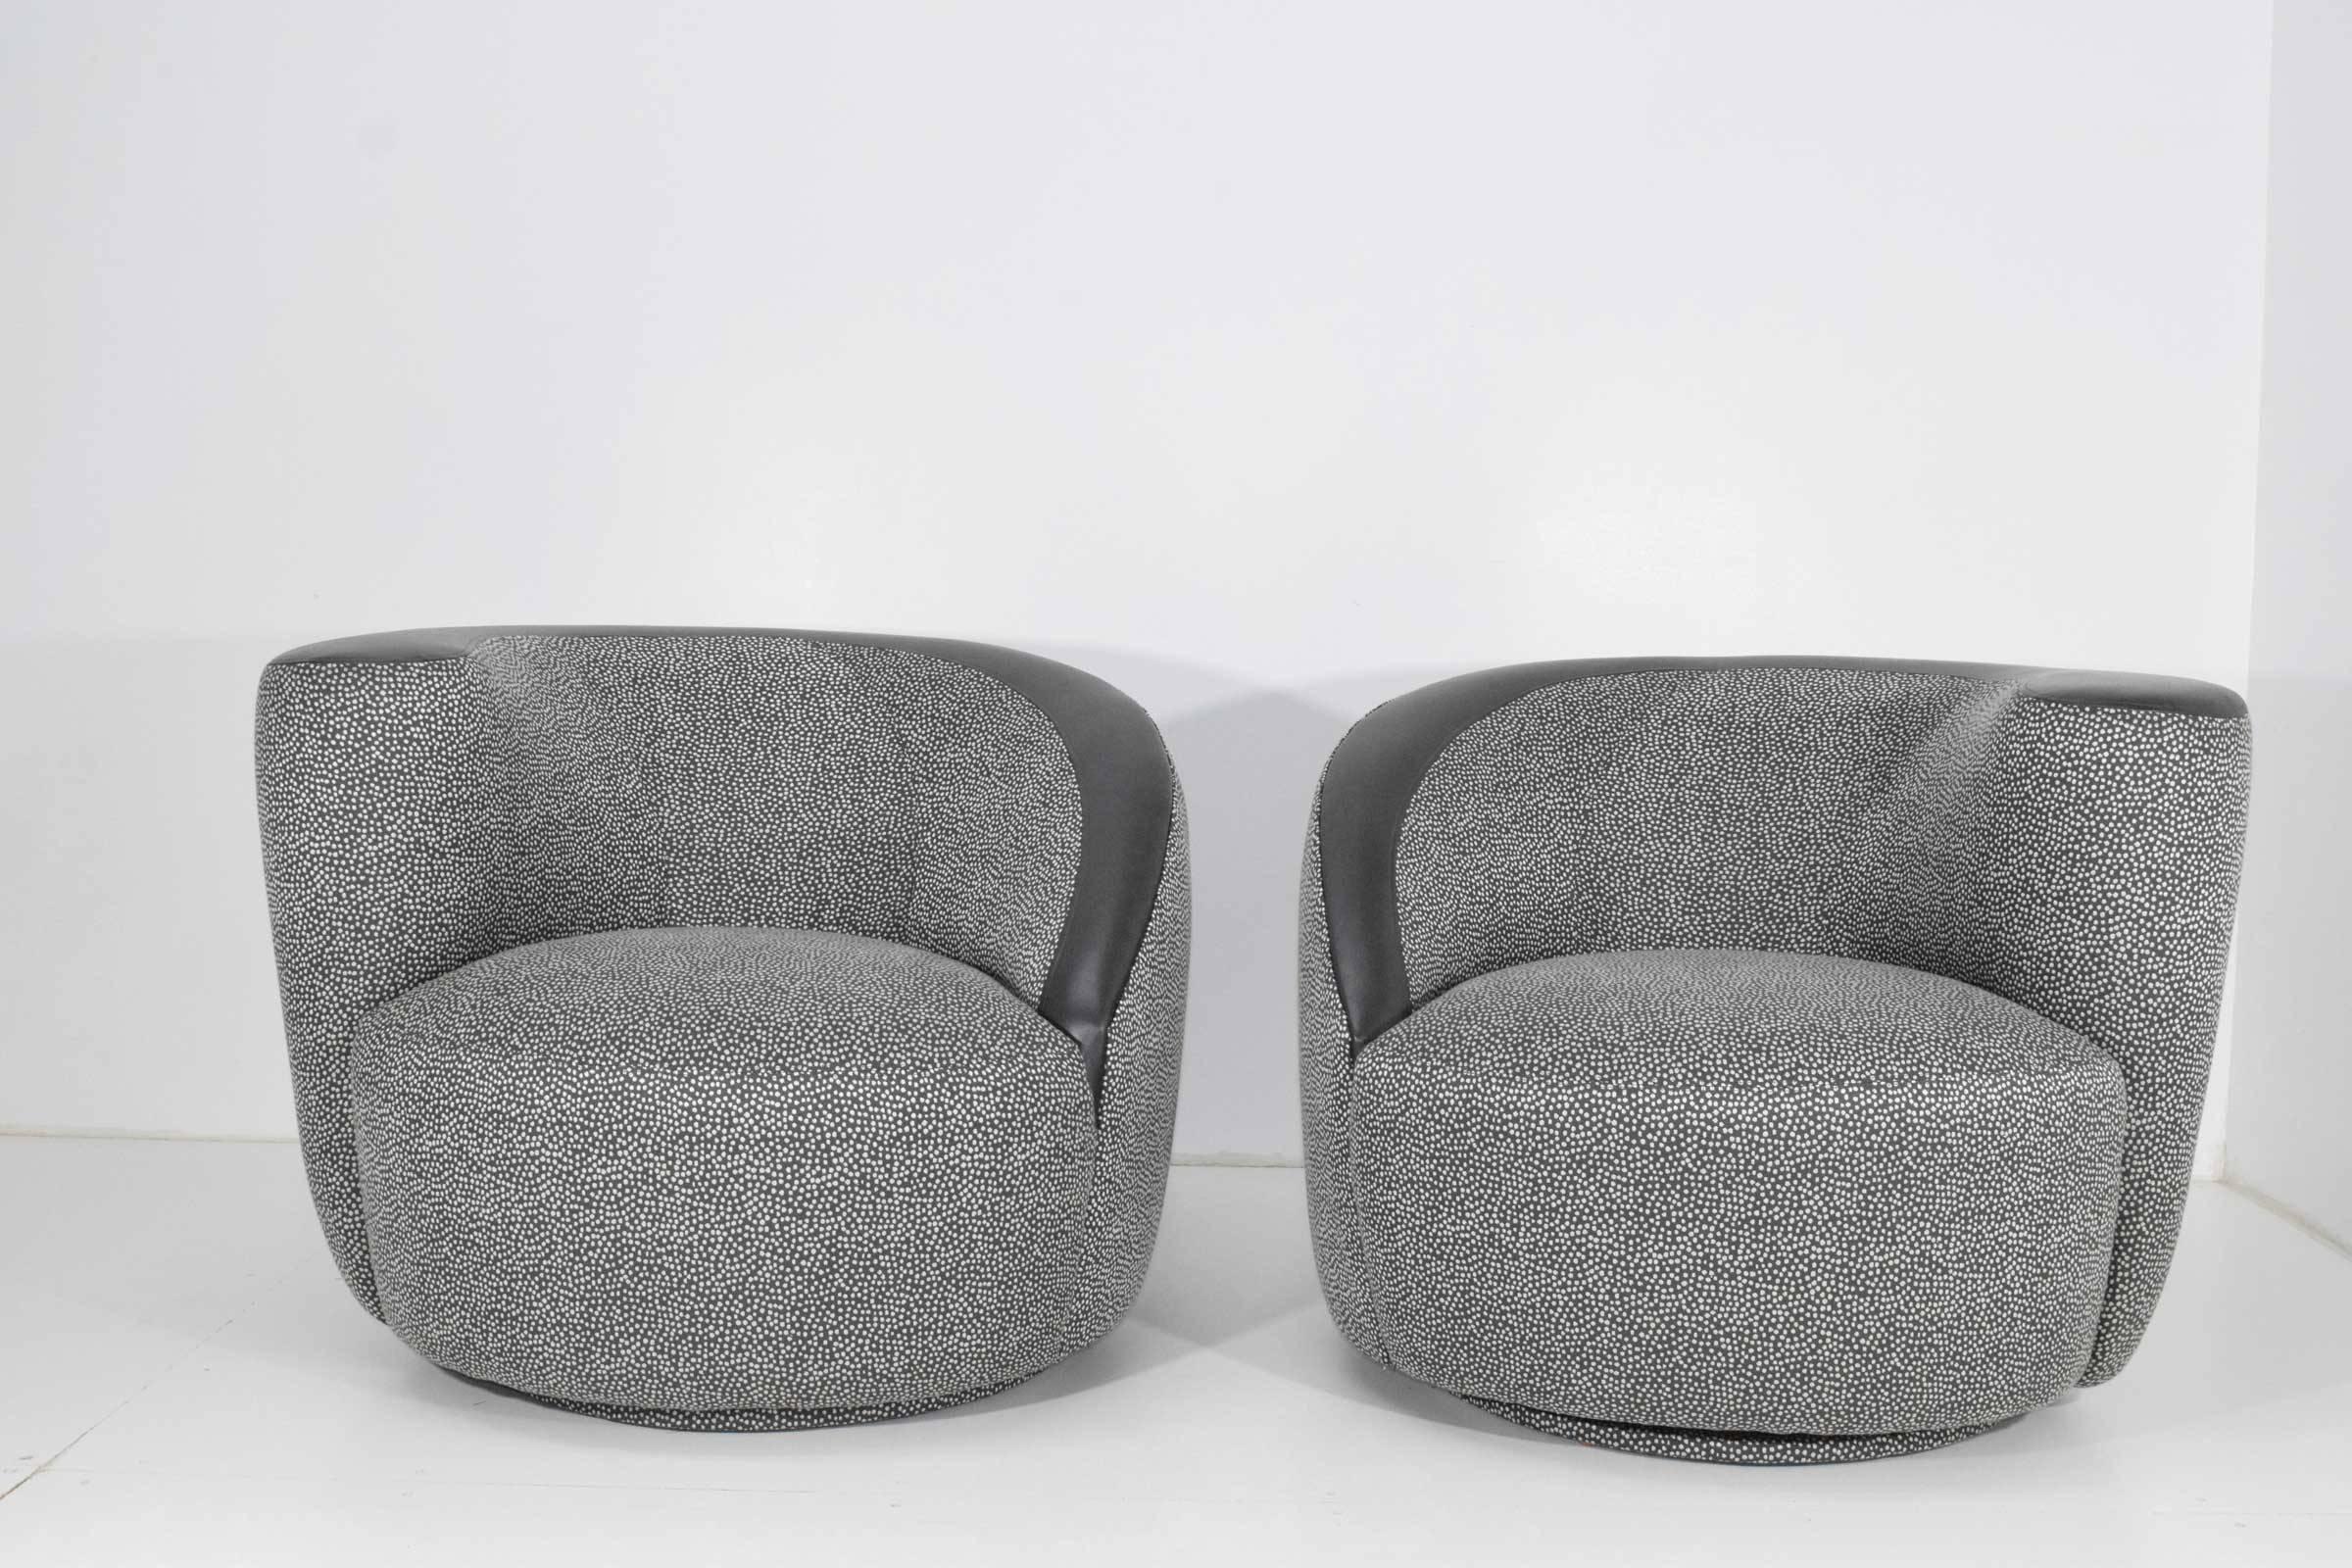 Vladimir Kagan meets Kelly Wearstler. Newly upholstered nautilus chairs in Duralee fabric with faux leather trim.